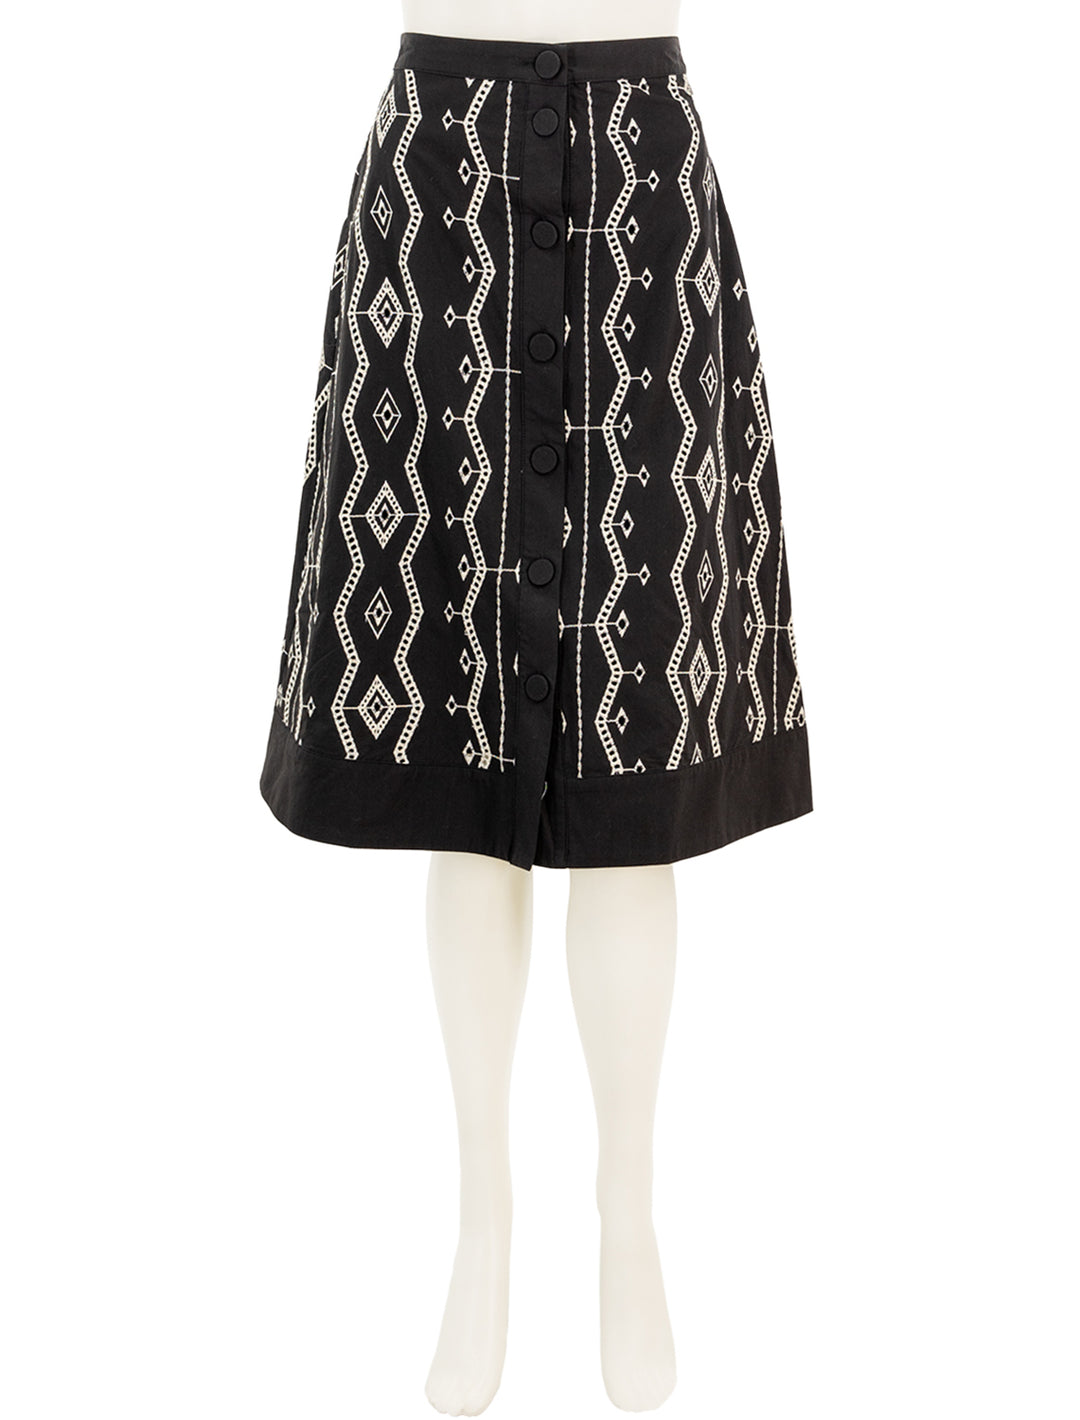 Front view of Suncoo Paris' first eyelet skirt in noir.